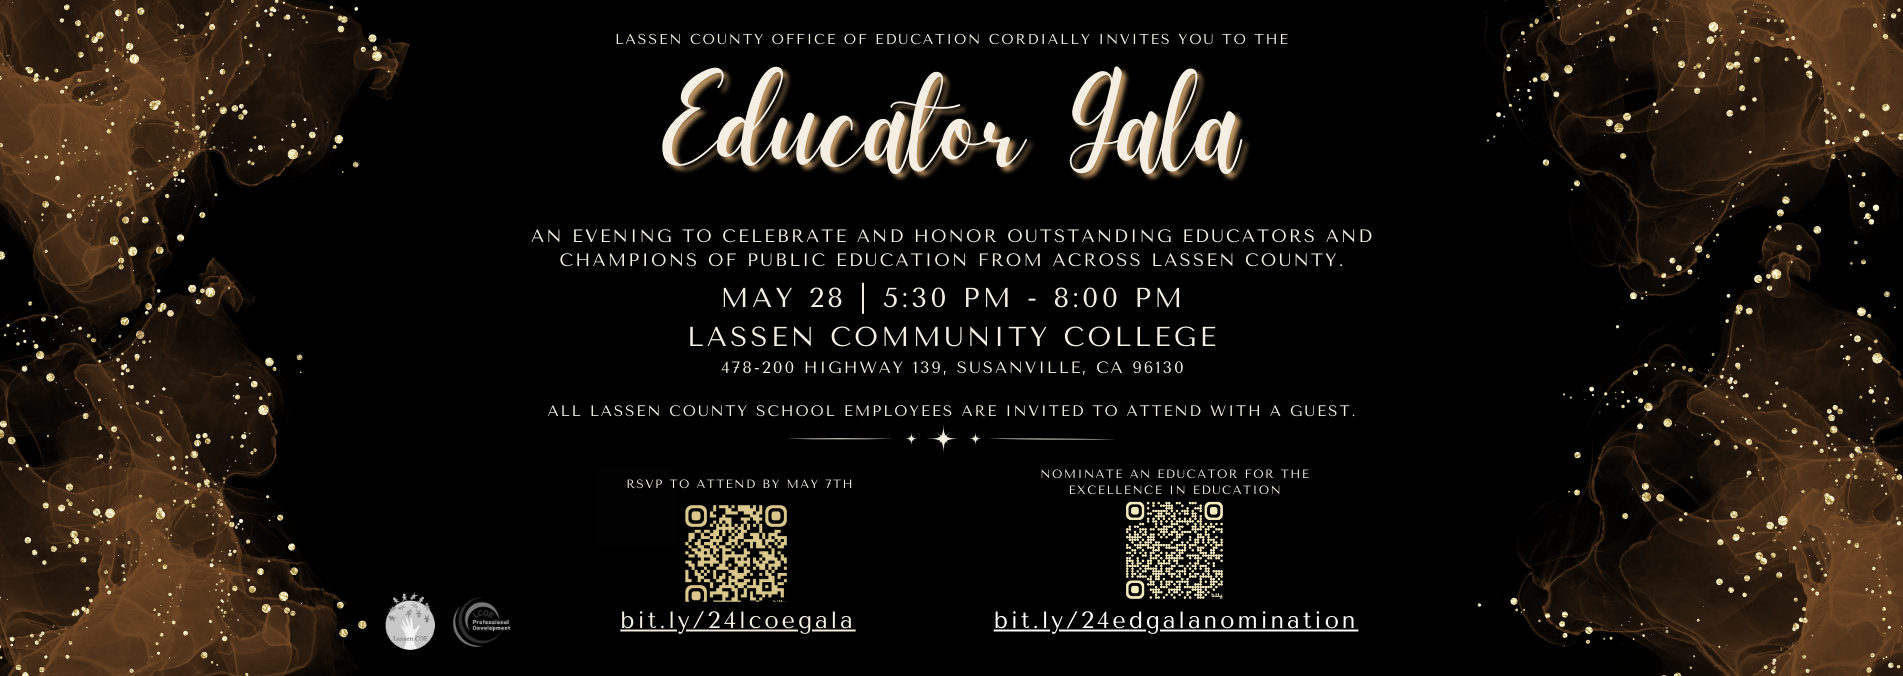 A sophisticated invitation to the “Educator Gala” hosted by Lassen County Office of Education. The image features:  A dark background adorned with abstract golden designs and sparkles. Central white text announcing the “Educator Gala”. Additional details below, including: The event’s purpose: “AN EVENING TO CELEBRATE AND HONOR OUTSTANDING EDUCATORS AND CHAMPIONS OF PUBLIC EDUCATION FROM ACROSS LASSEN COUNTY.” Date and time: May 28 